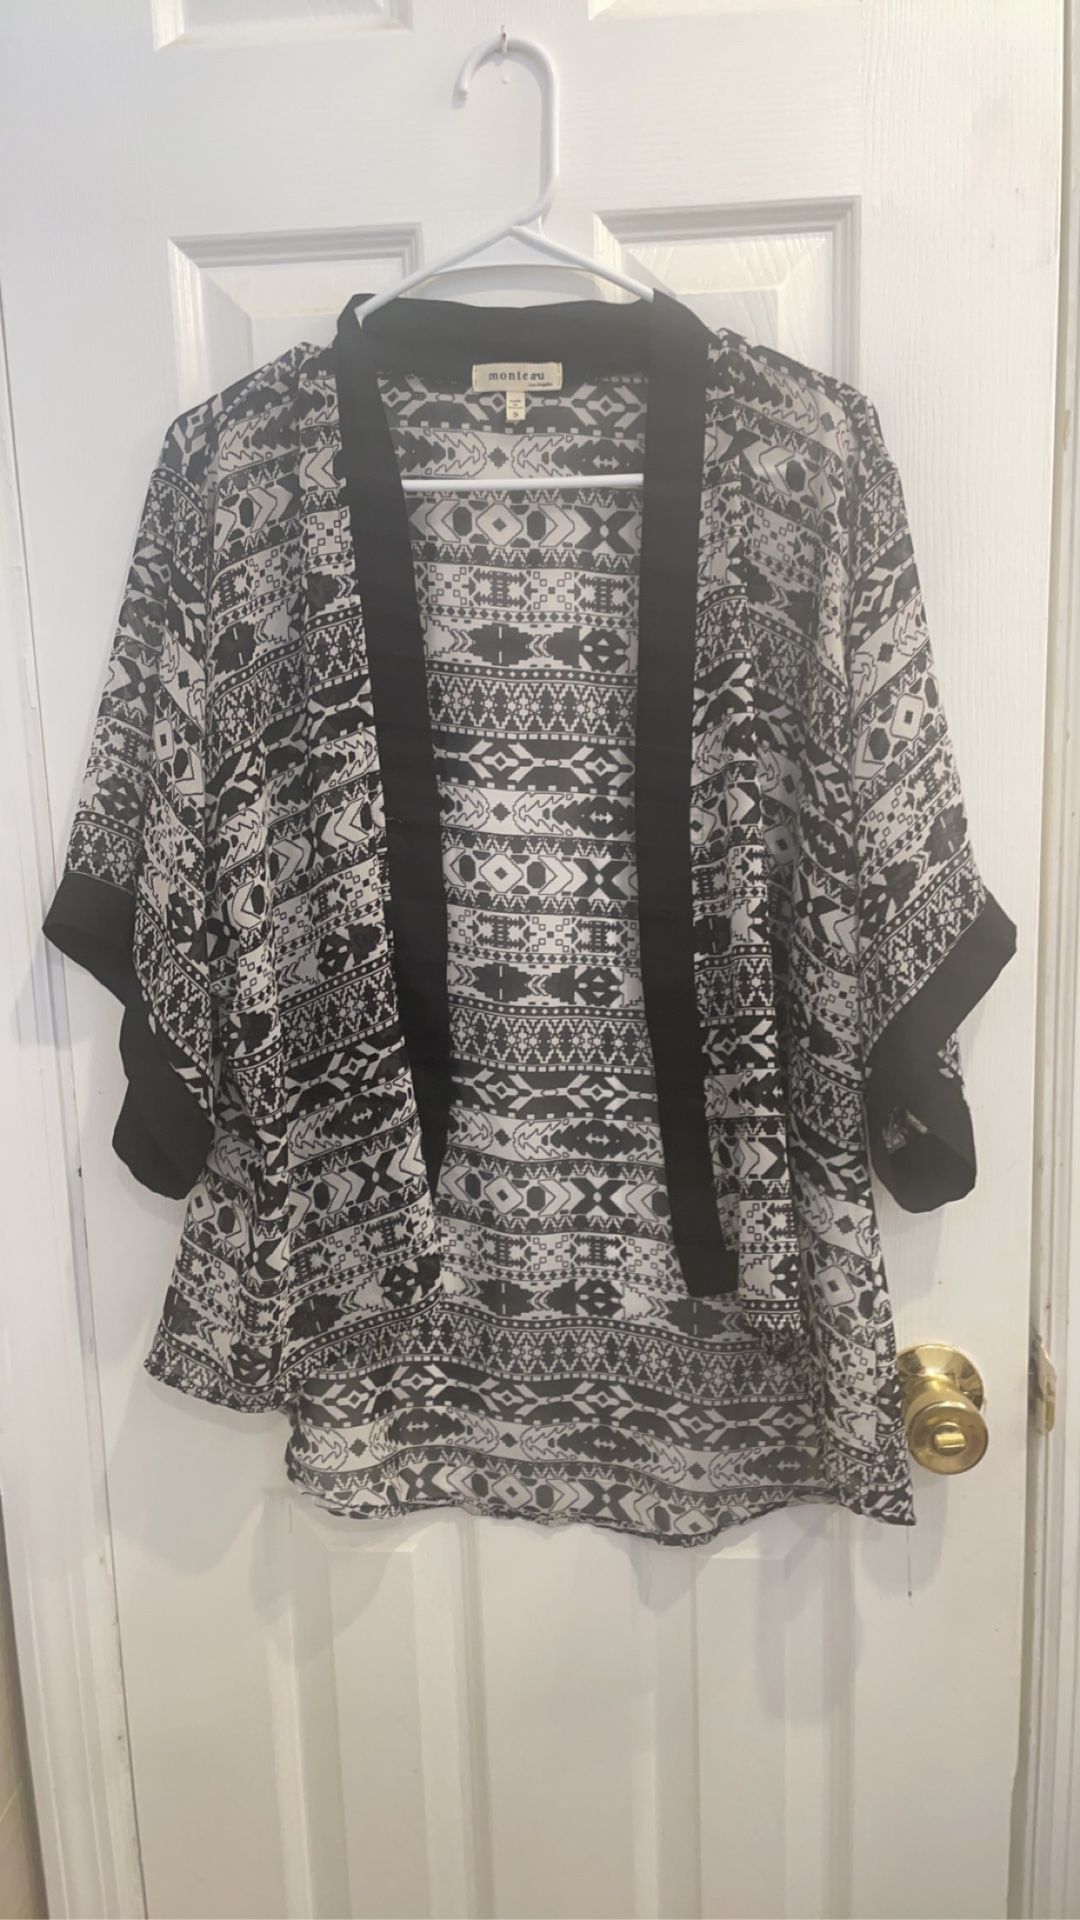 Monteau black and white sheer lightweight cardigan/ coverup size small